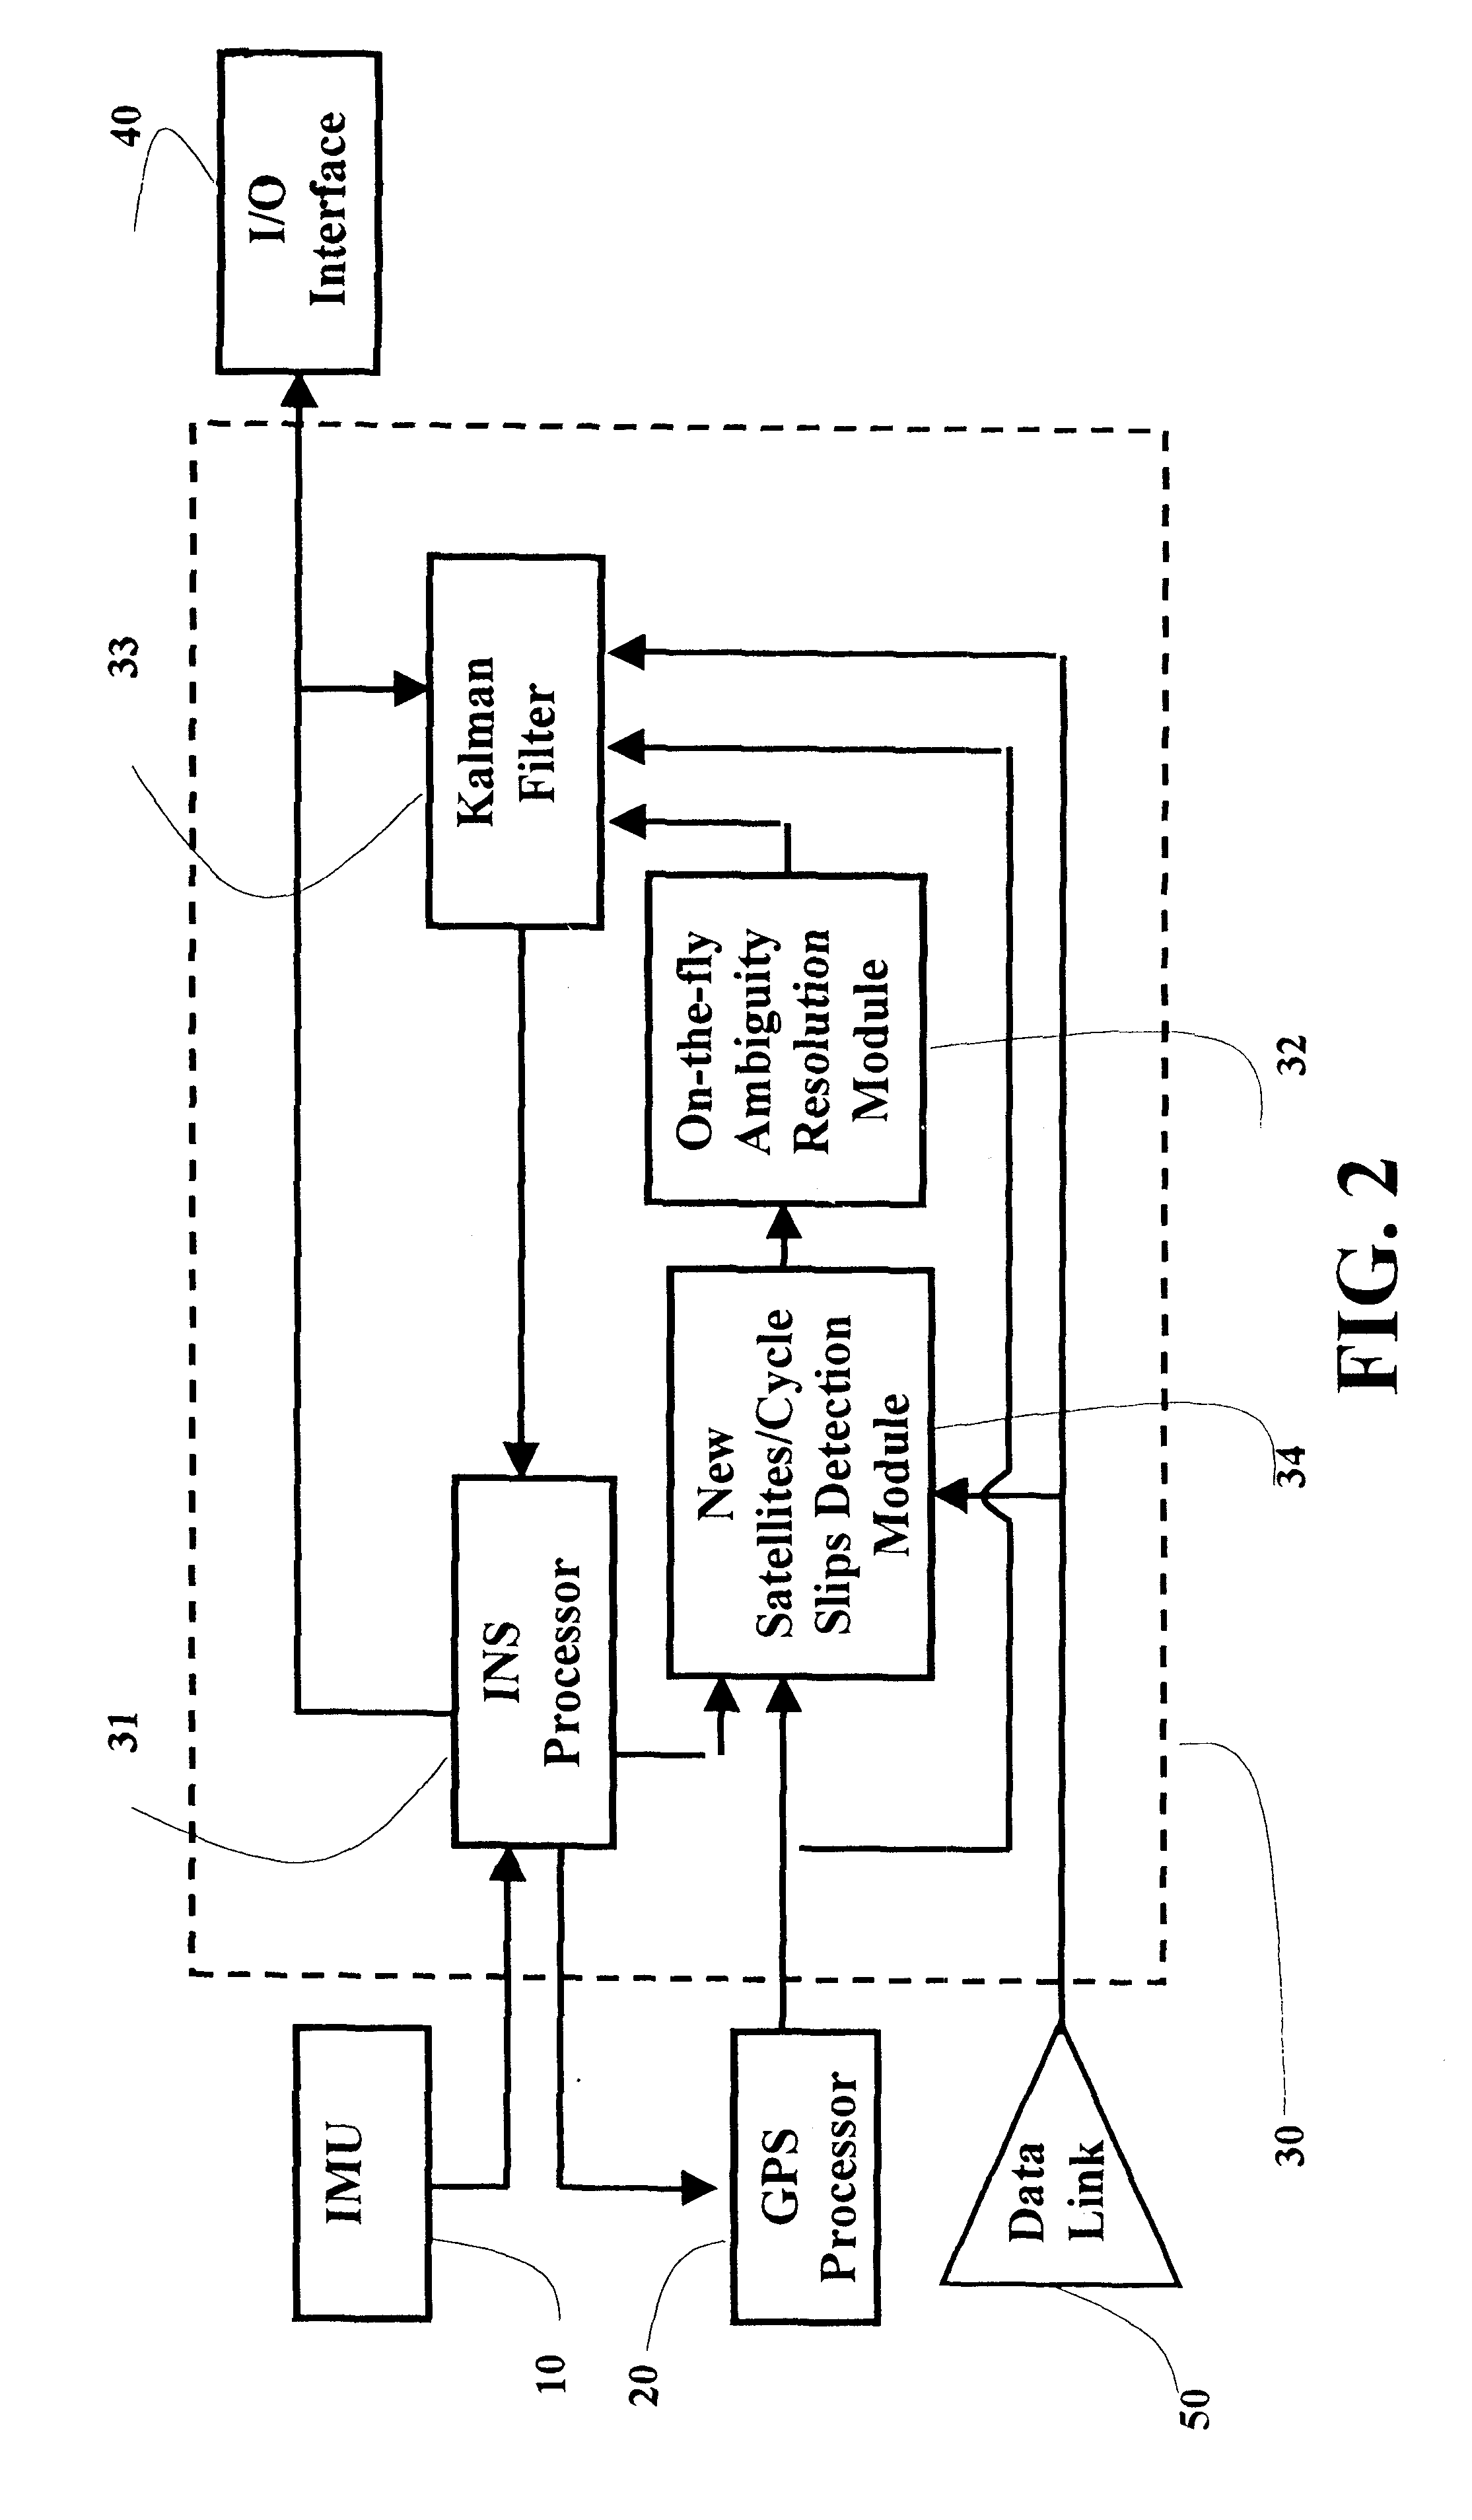 Real-time integrated vehicle positioning method and system with differential GPS